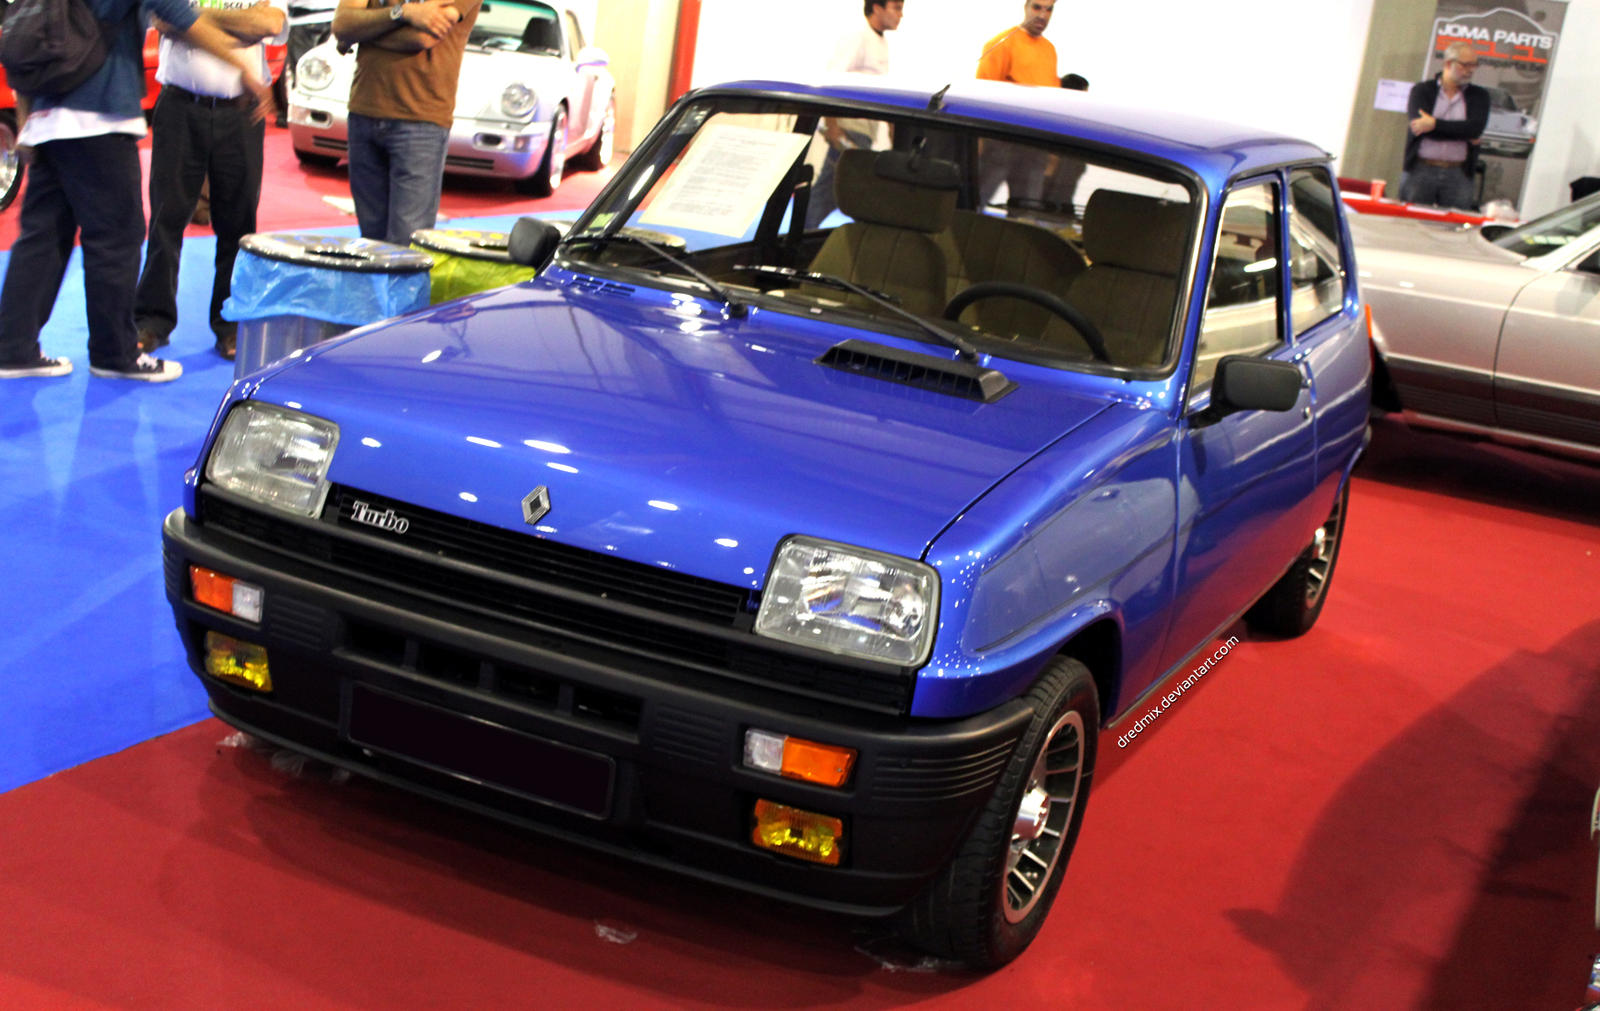 Renault 5 Gt Turbo by Dredmix